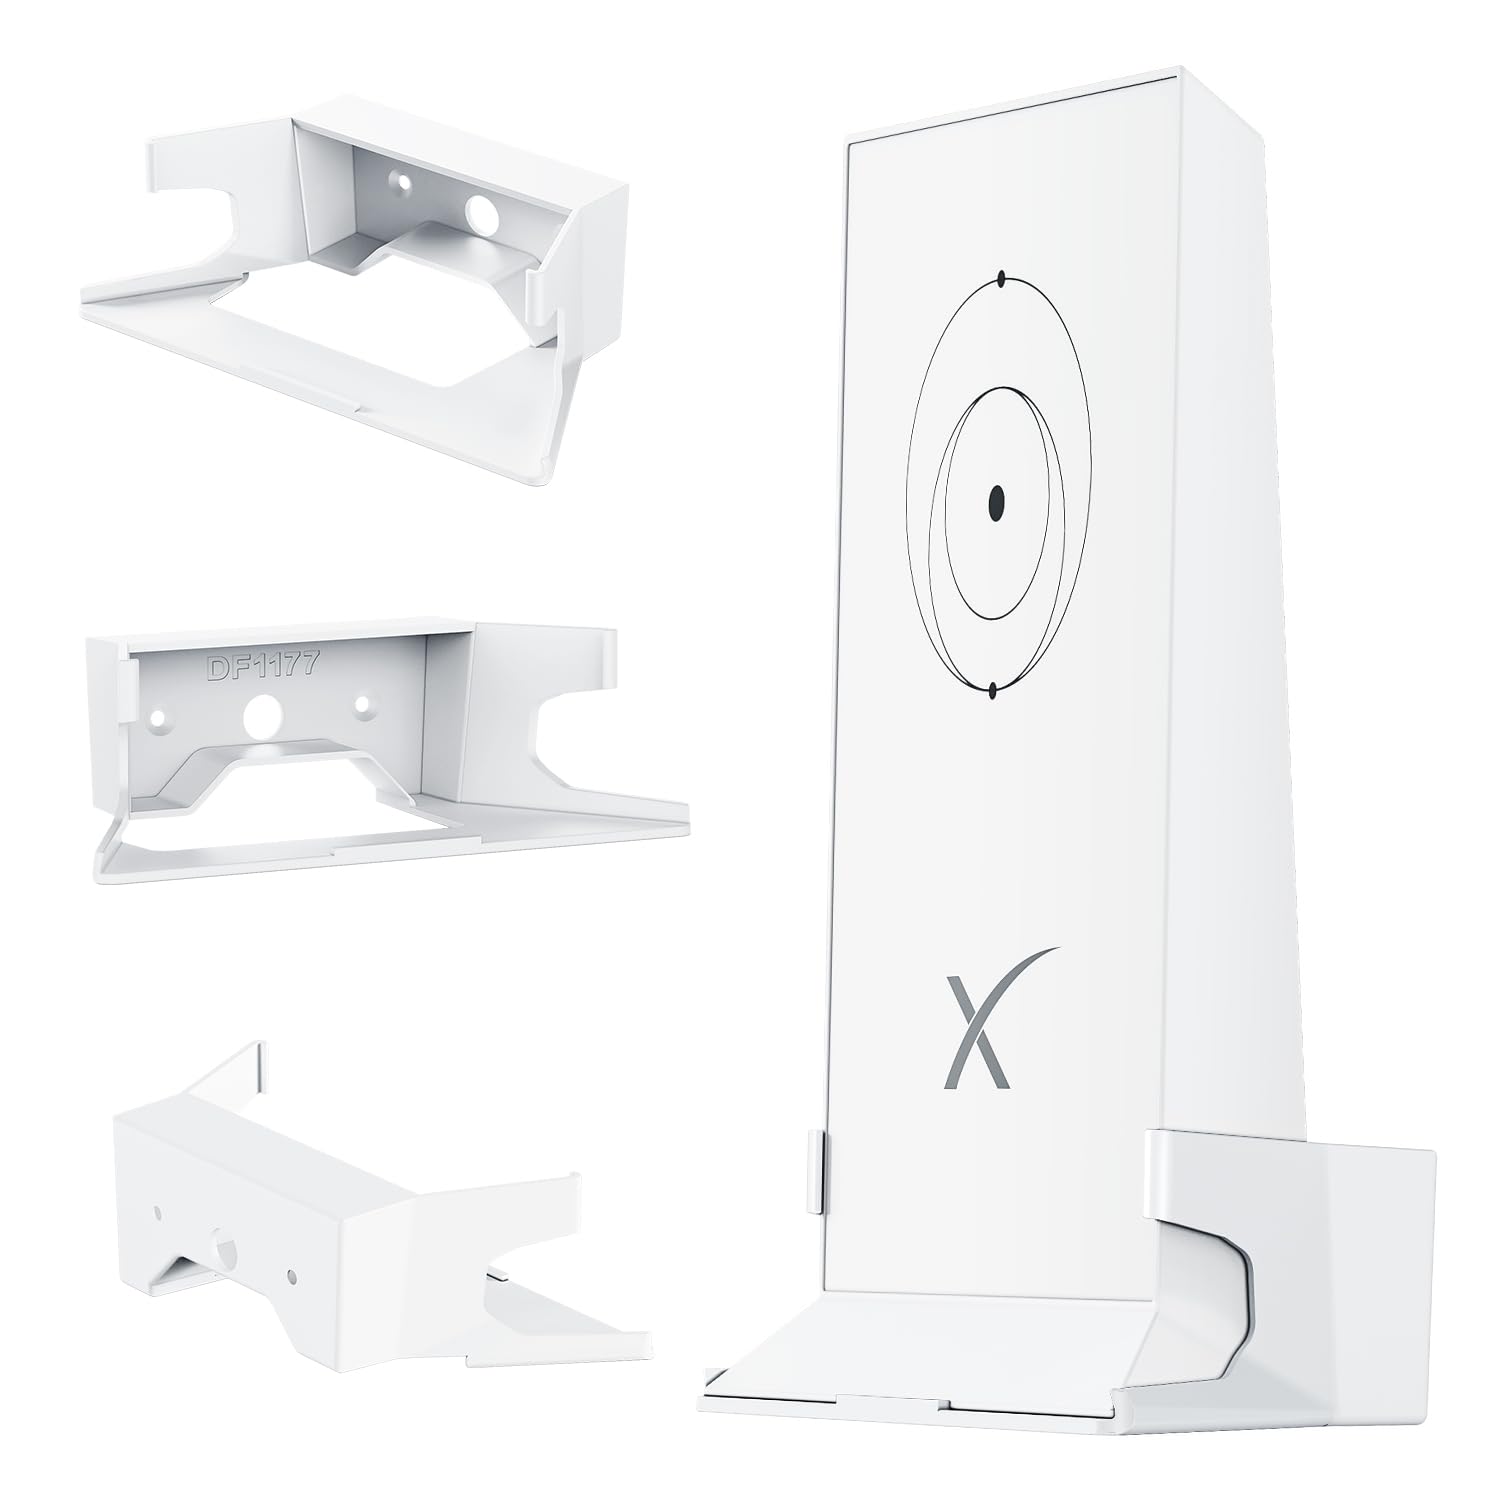 Starlink Wall Mount, New Upgraded Star Link Internet Kit Satellite Brackets ABS Router Holder Protection for StarLink Mesh Router V2 Mesh Router White